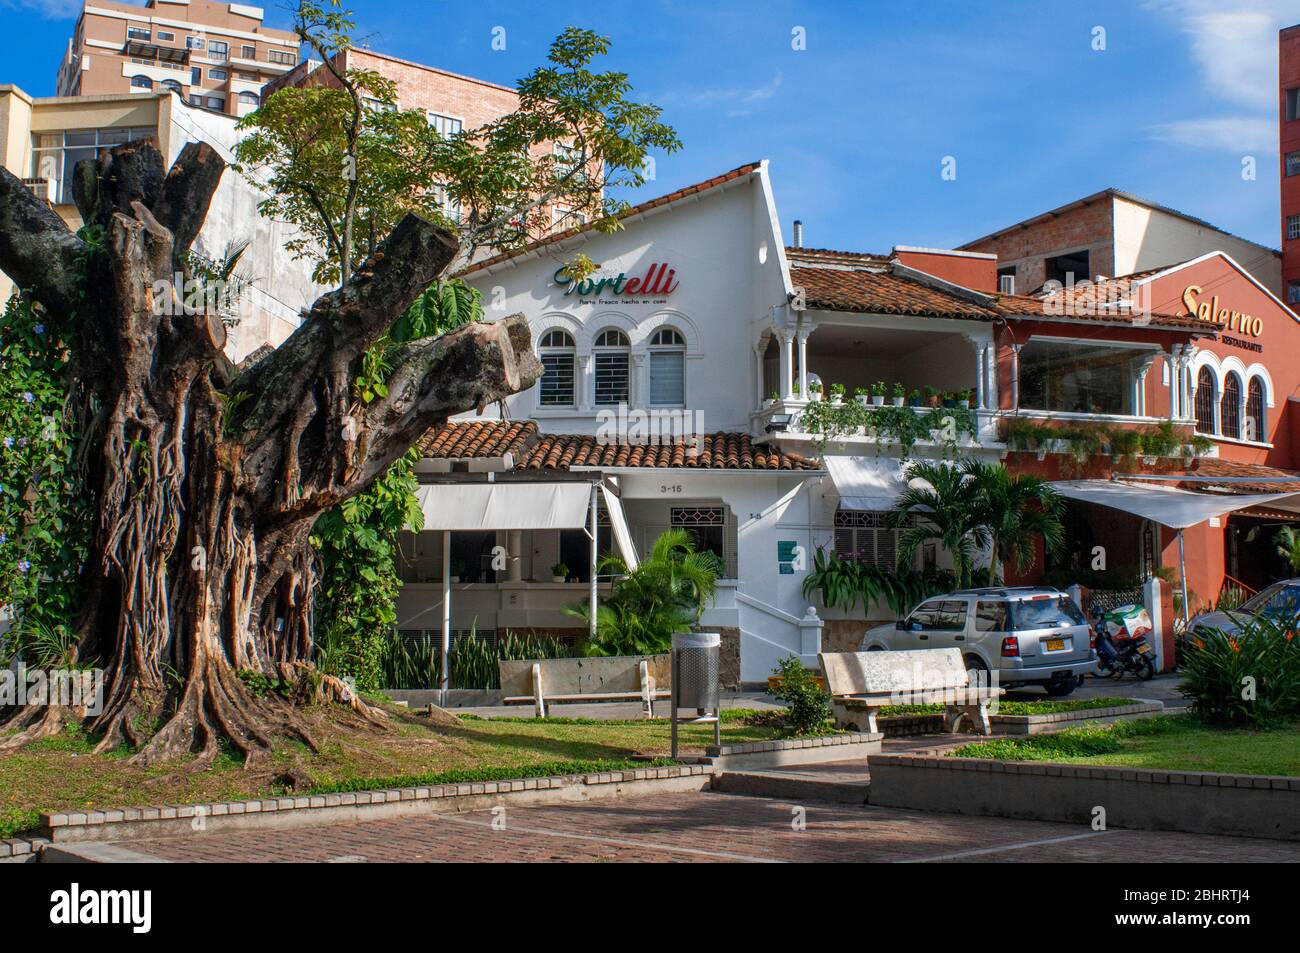 Tortelli Restaurant and Salerno restaurant in Cali the Cauca Valley, Colombia, South America Stock Photo